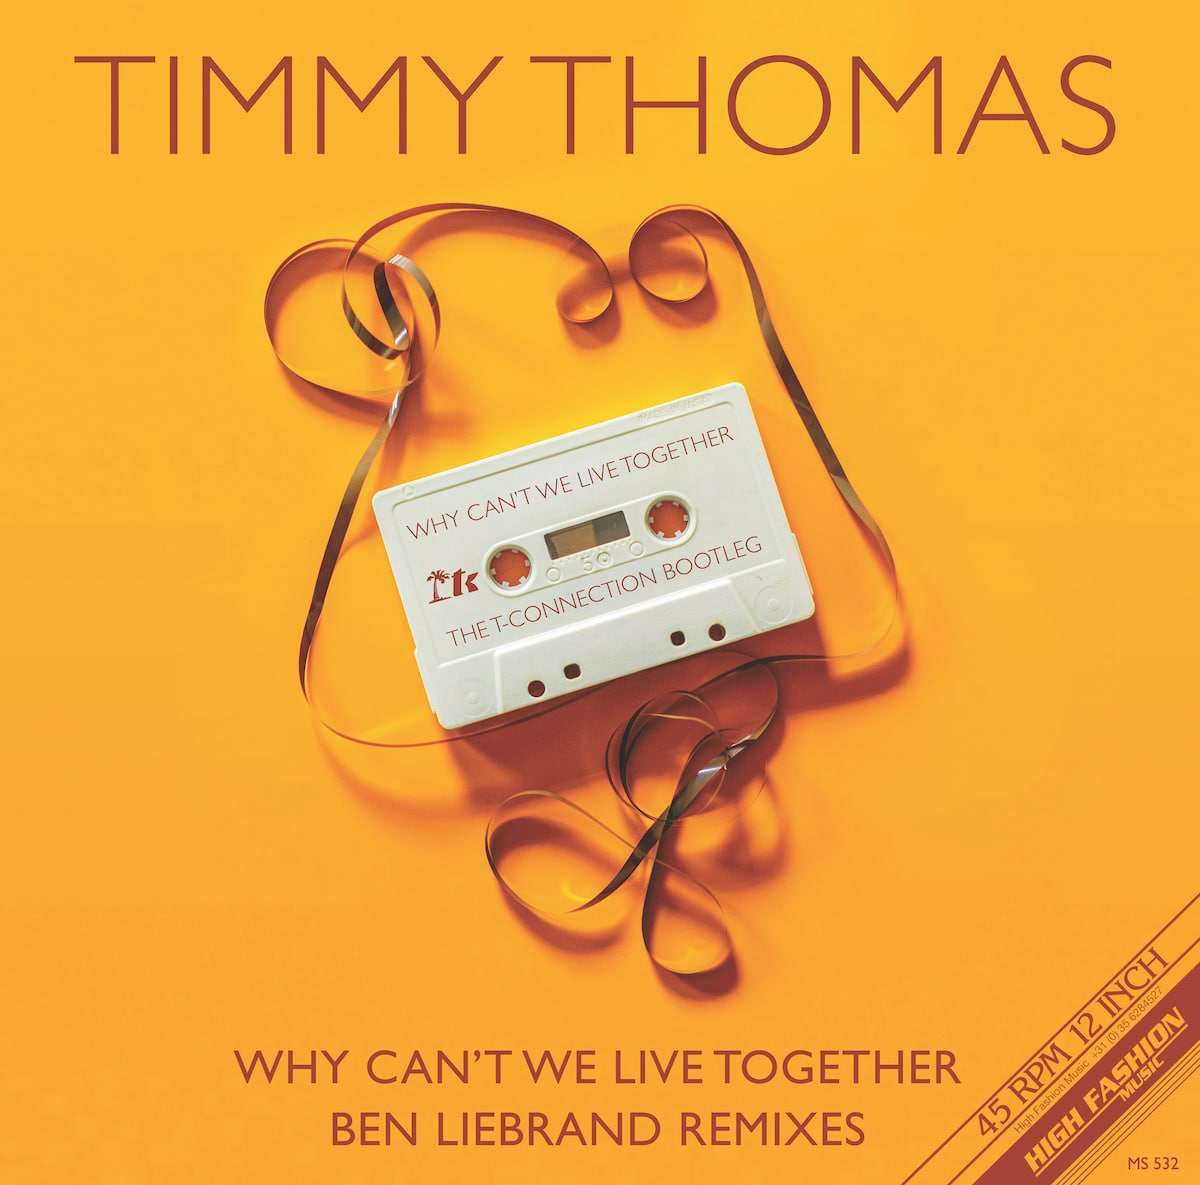 Timmy Thomas - Why Can’t We Live Together (Ben Liebrand Remixes)